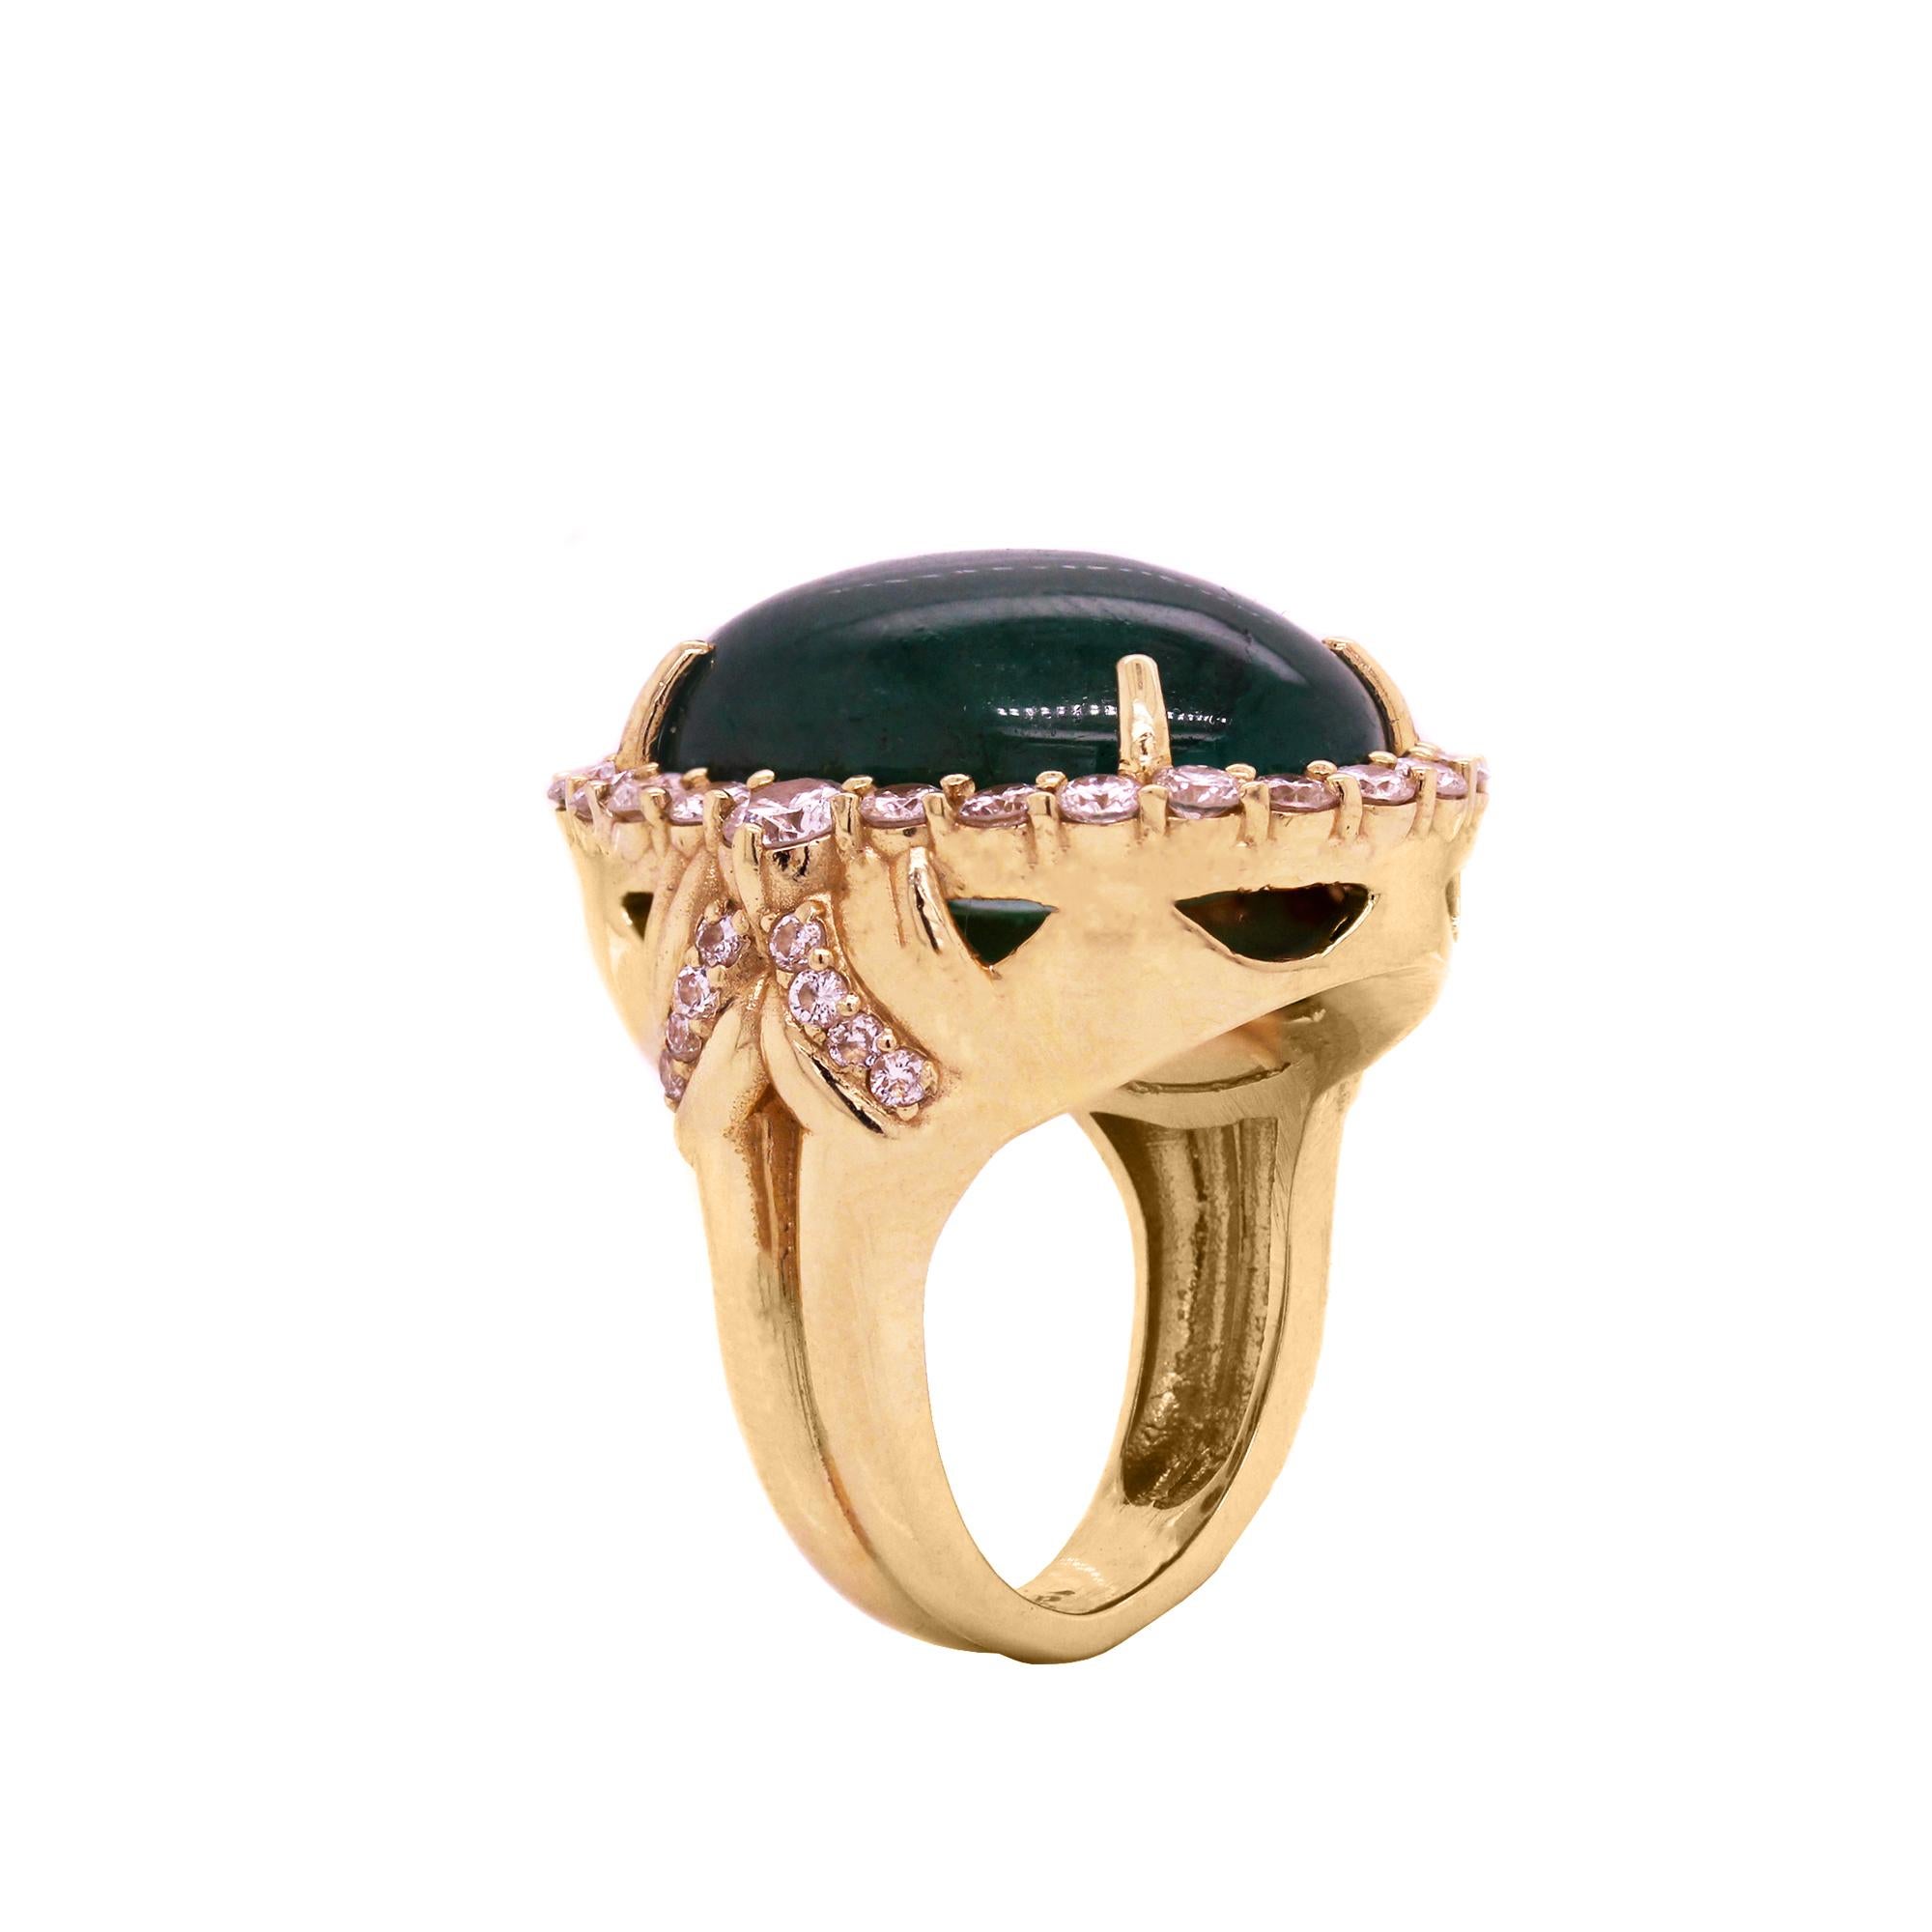 Contemporary 33 Carat Cabochon Oval Colombian Emerald 18K Yellow Gold Diamond Cocktail Ring